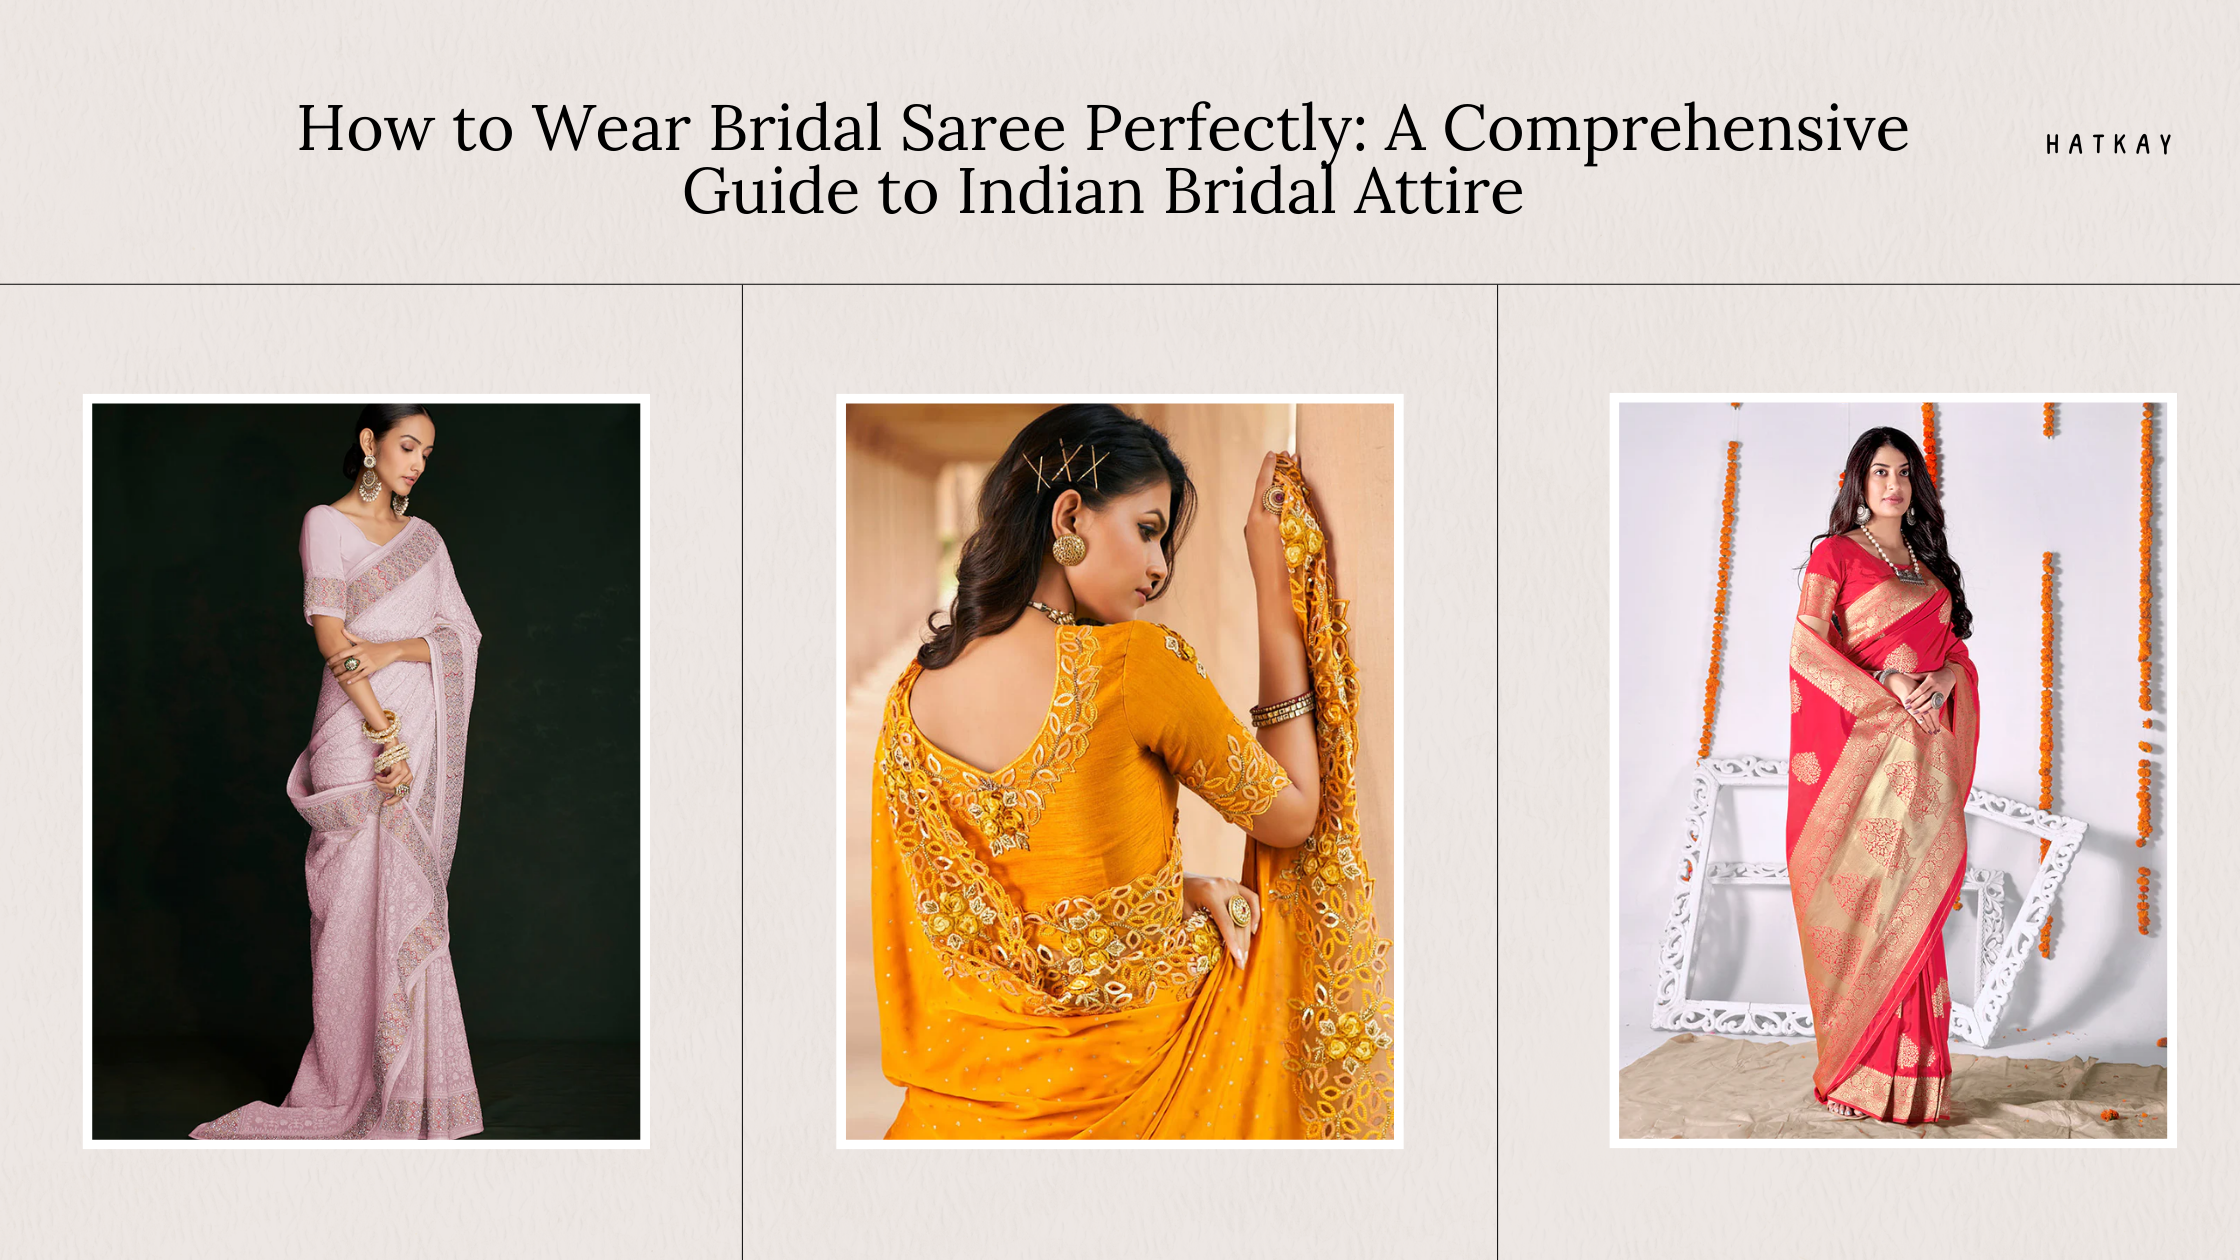 How to Wear Bridal Saree Perfectly: A Comprehensive Guide to Indian Bridal Attire